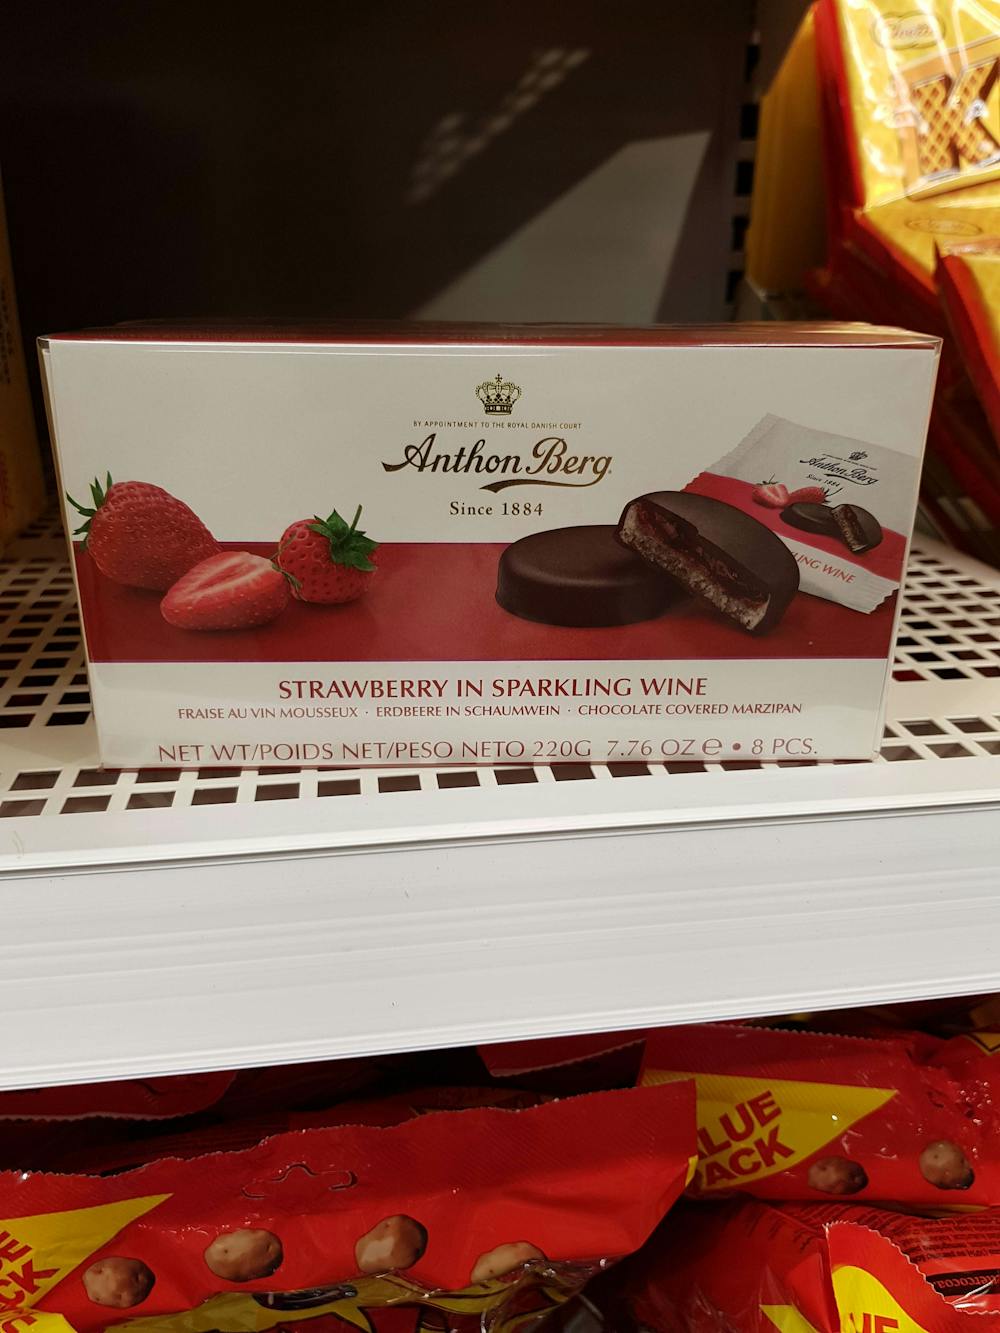 Anthon Berg Chocolate Covered Marzipan with Strawberry and